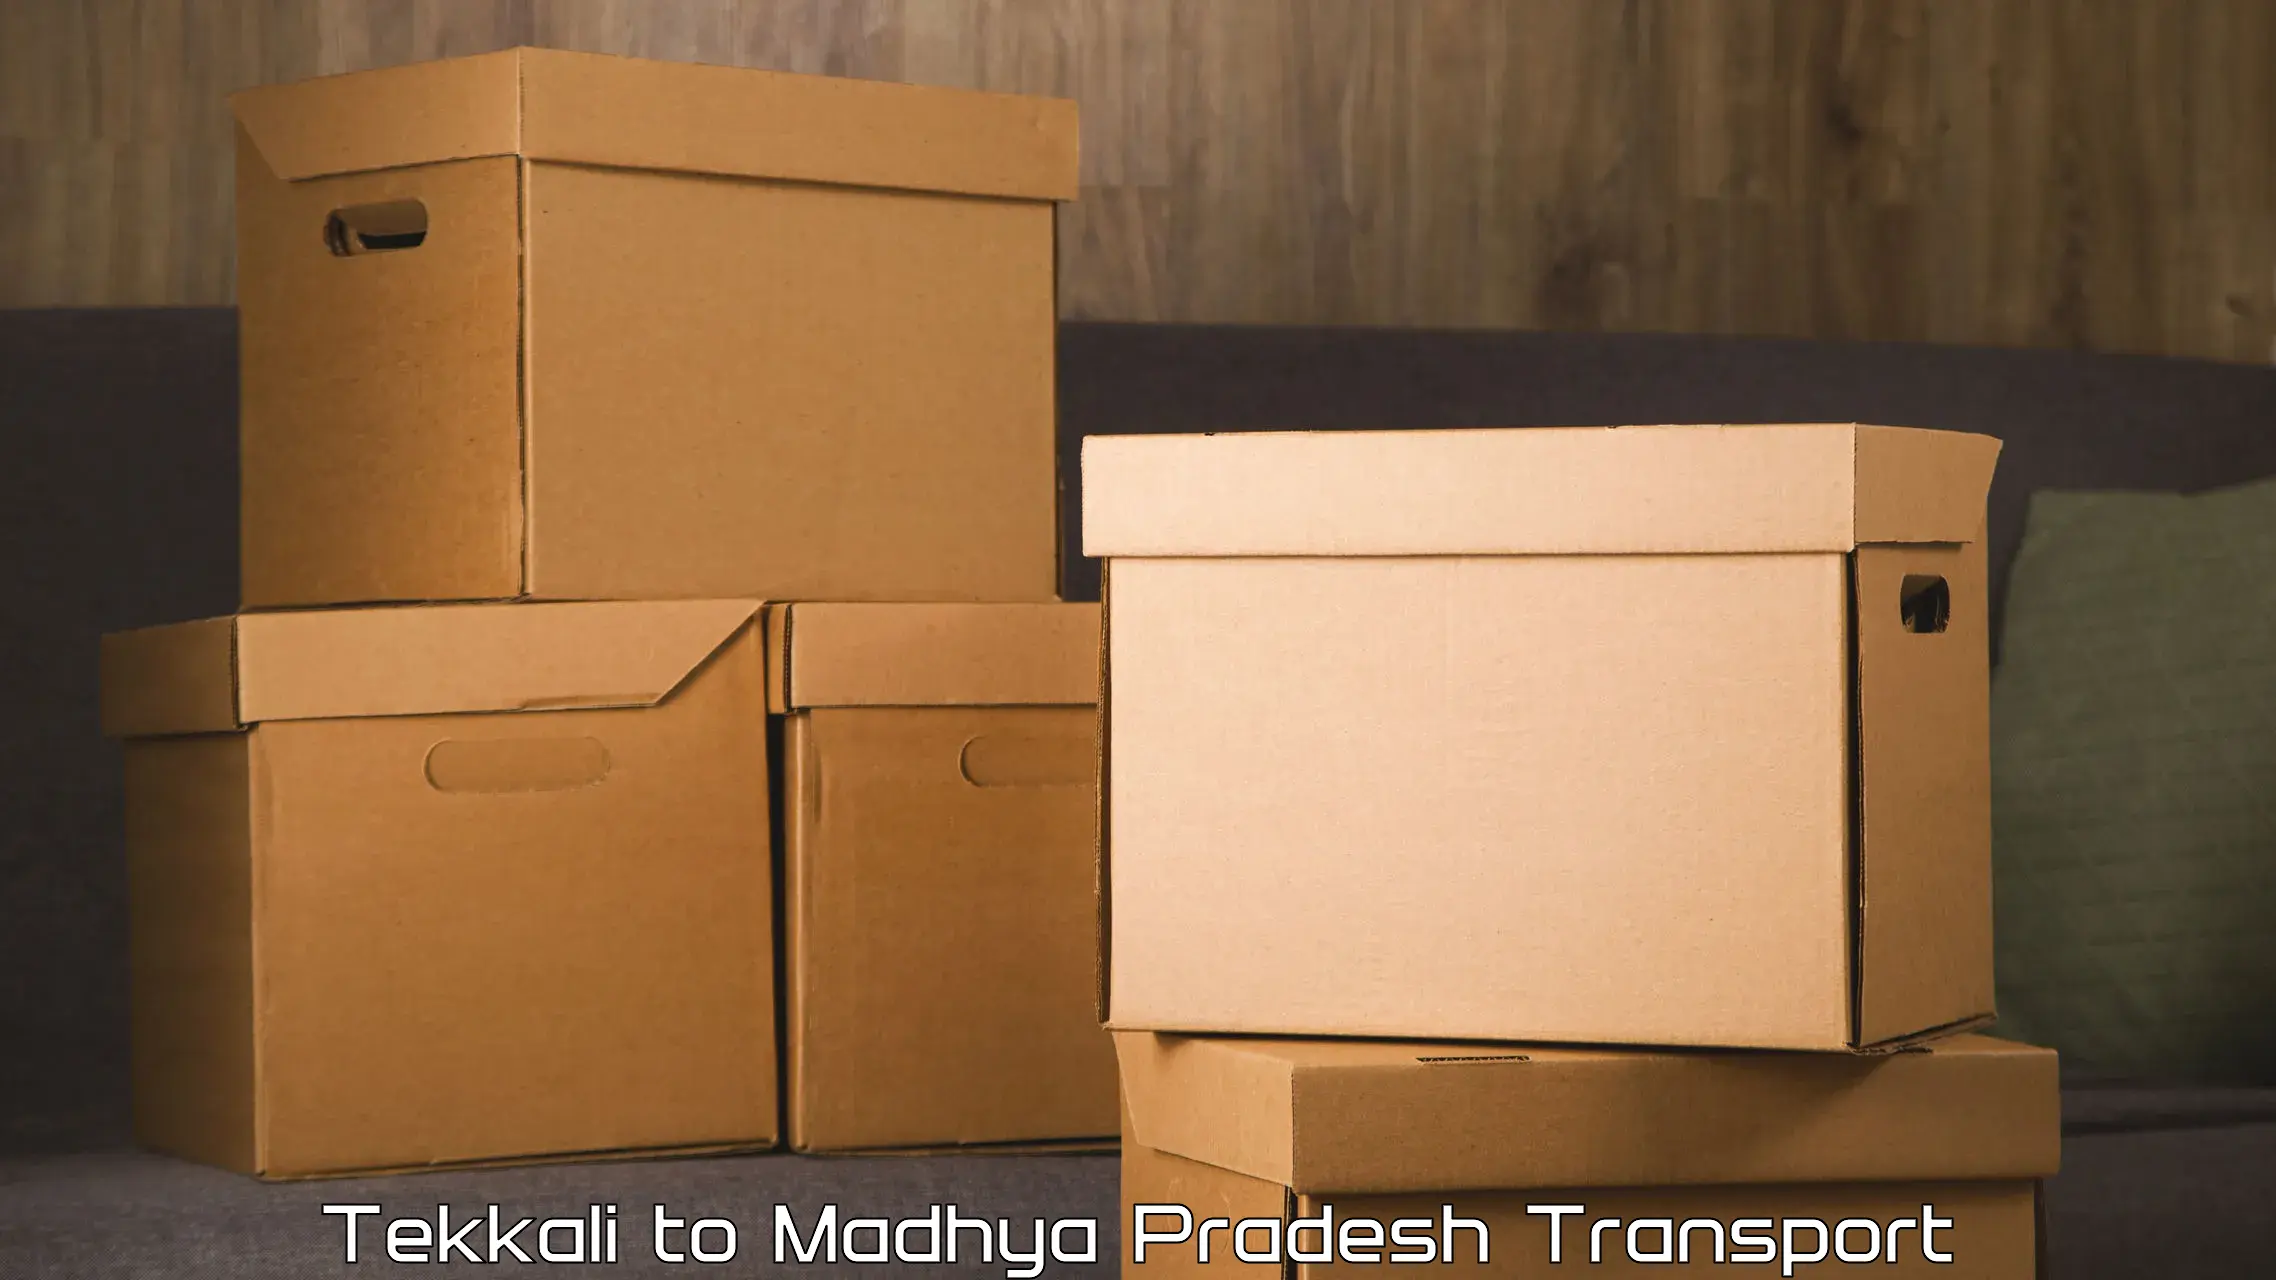 Shipping services Tekkali to BHEL Bhopal